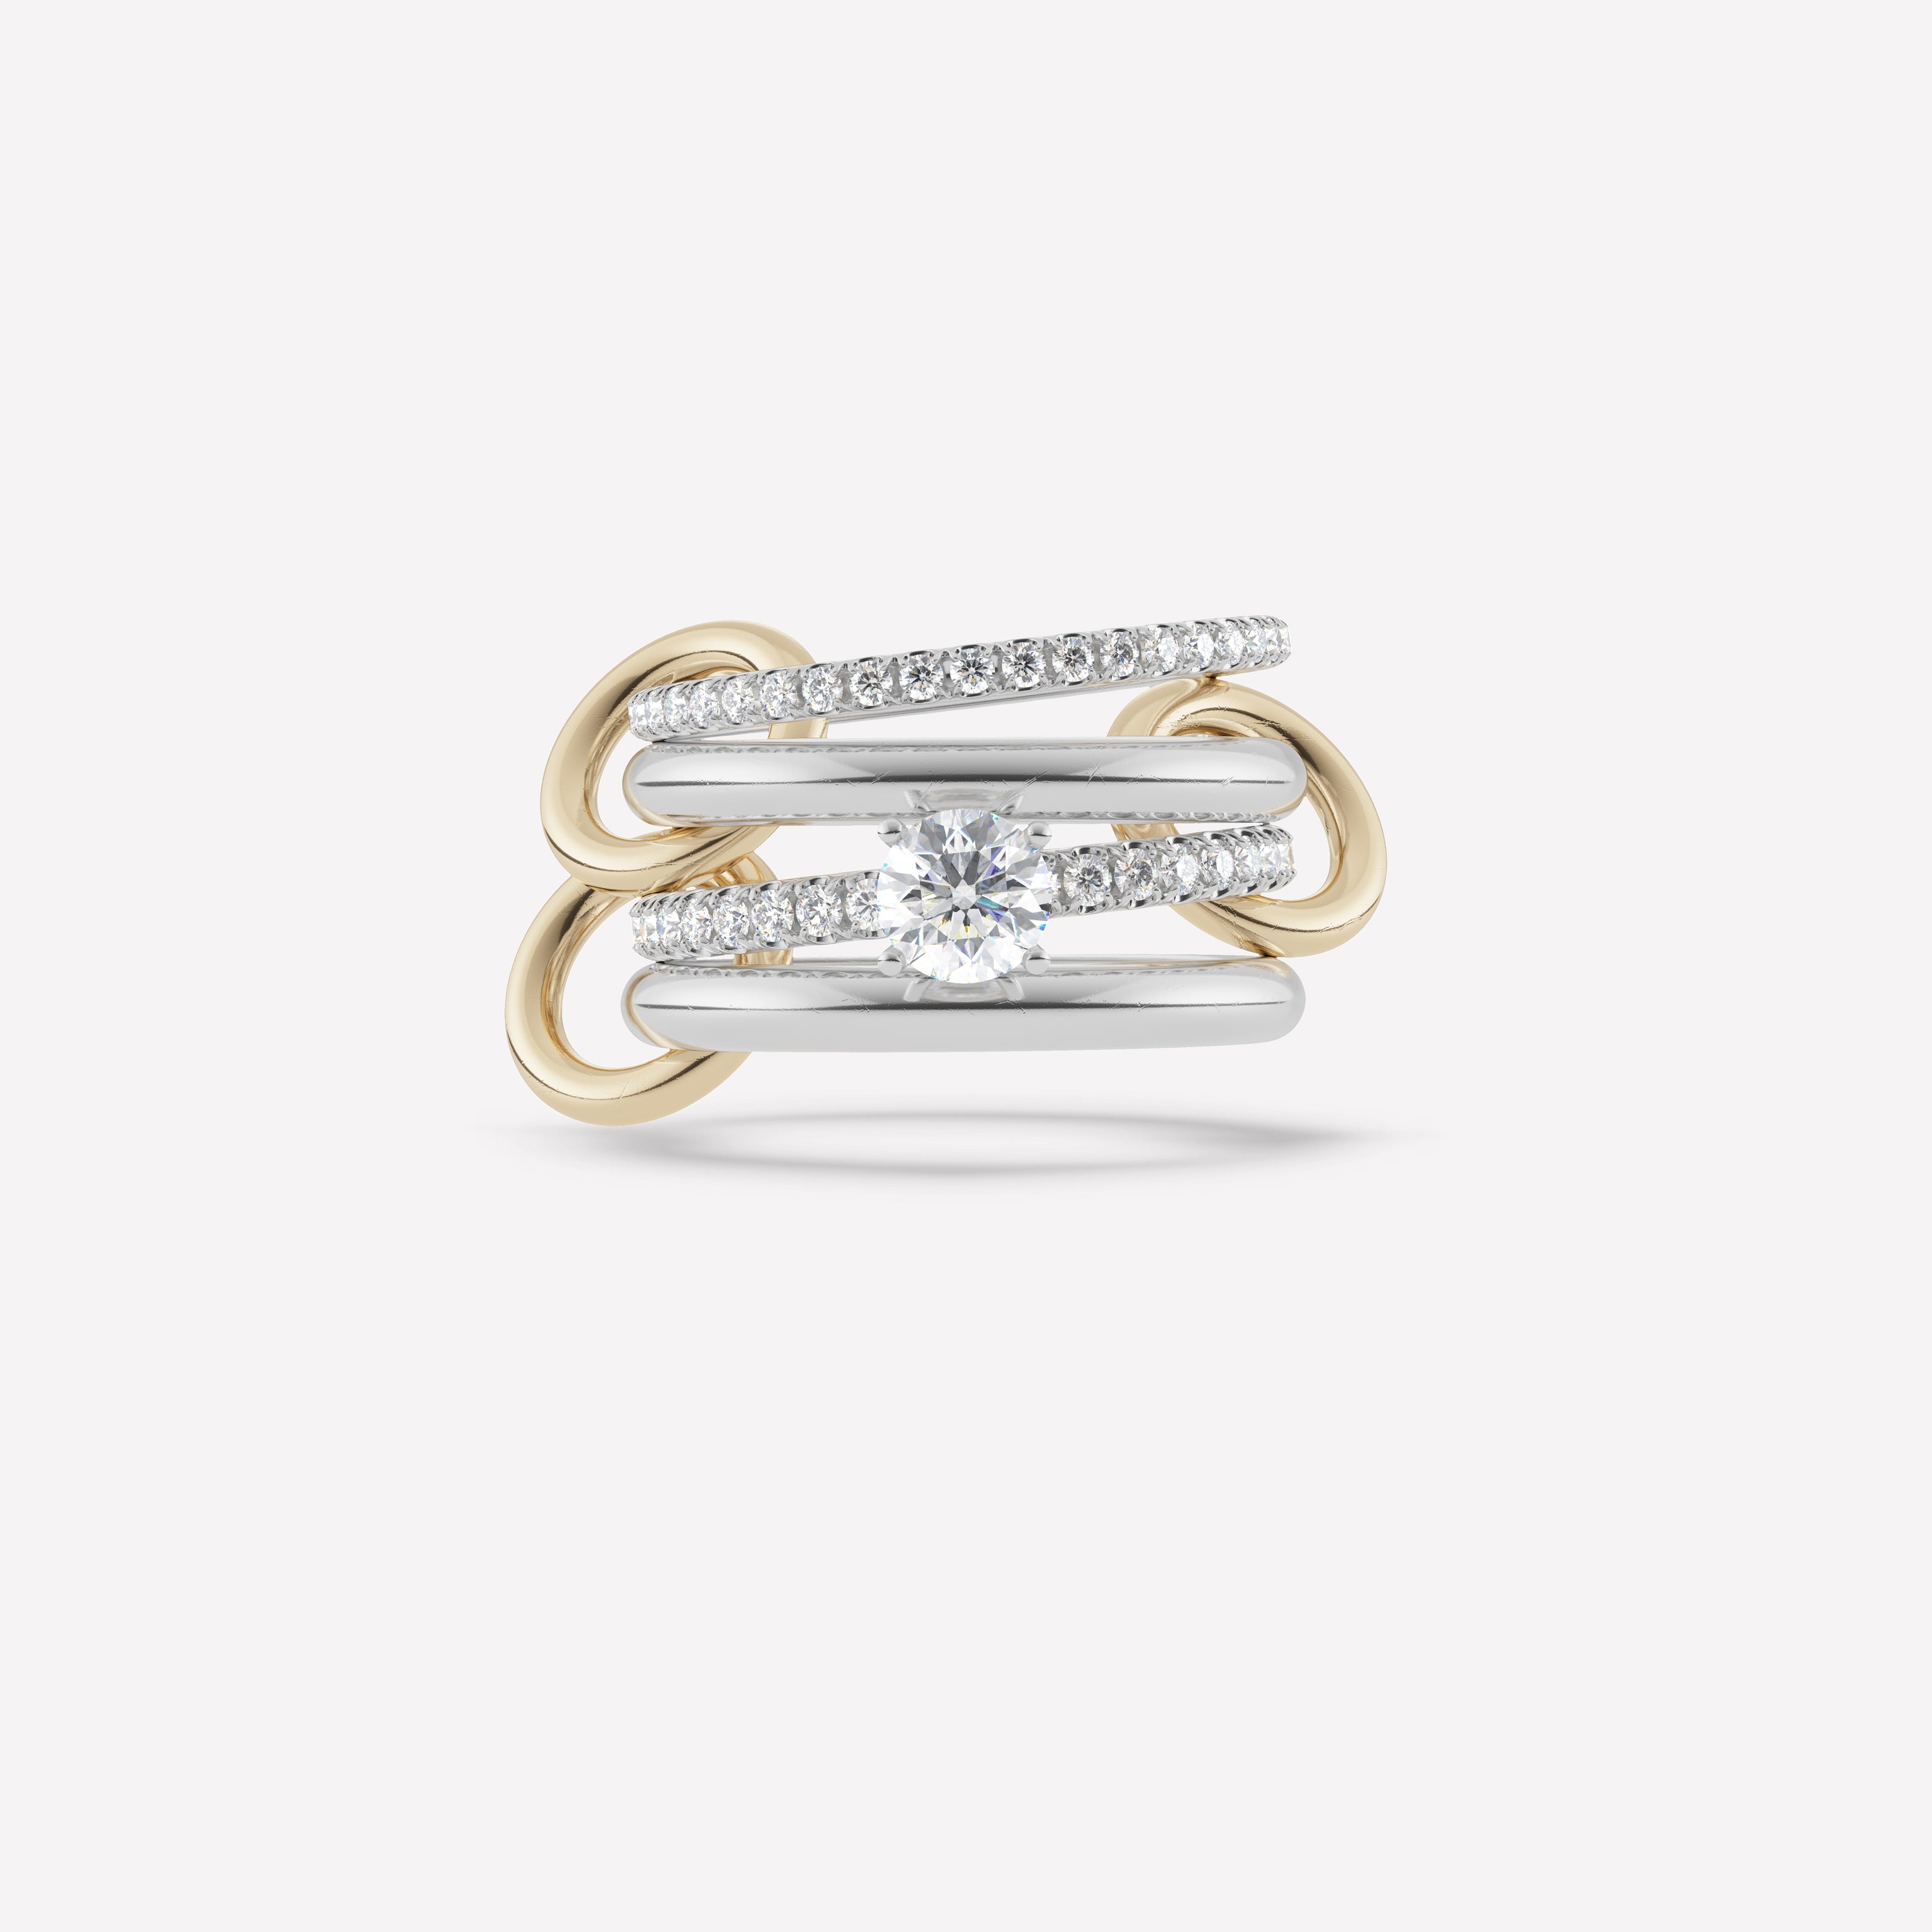 Cora - 0.5 carat / Natural / Not sure of my size